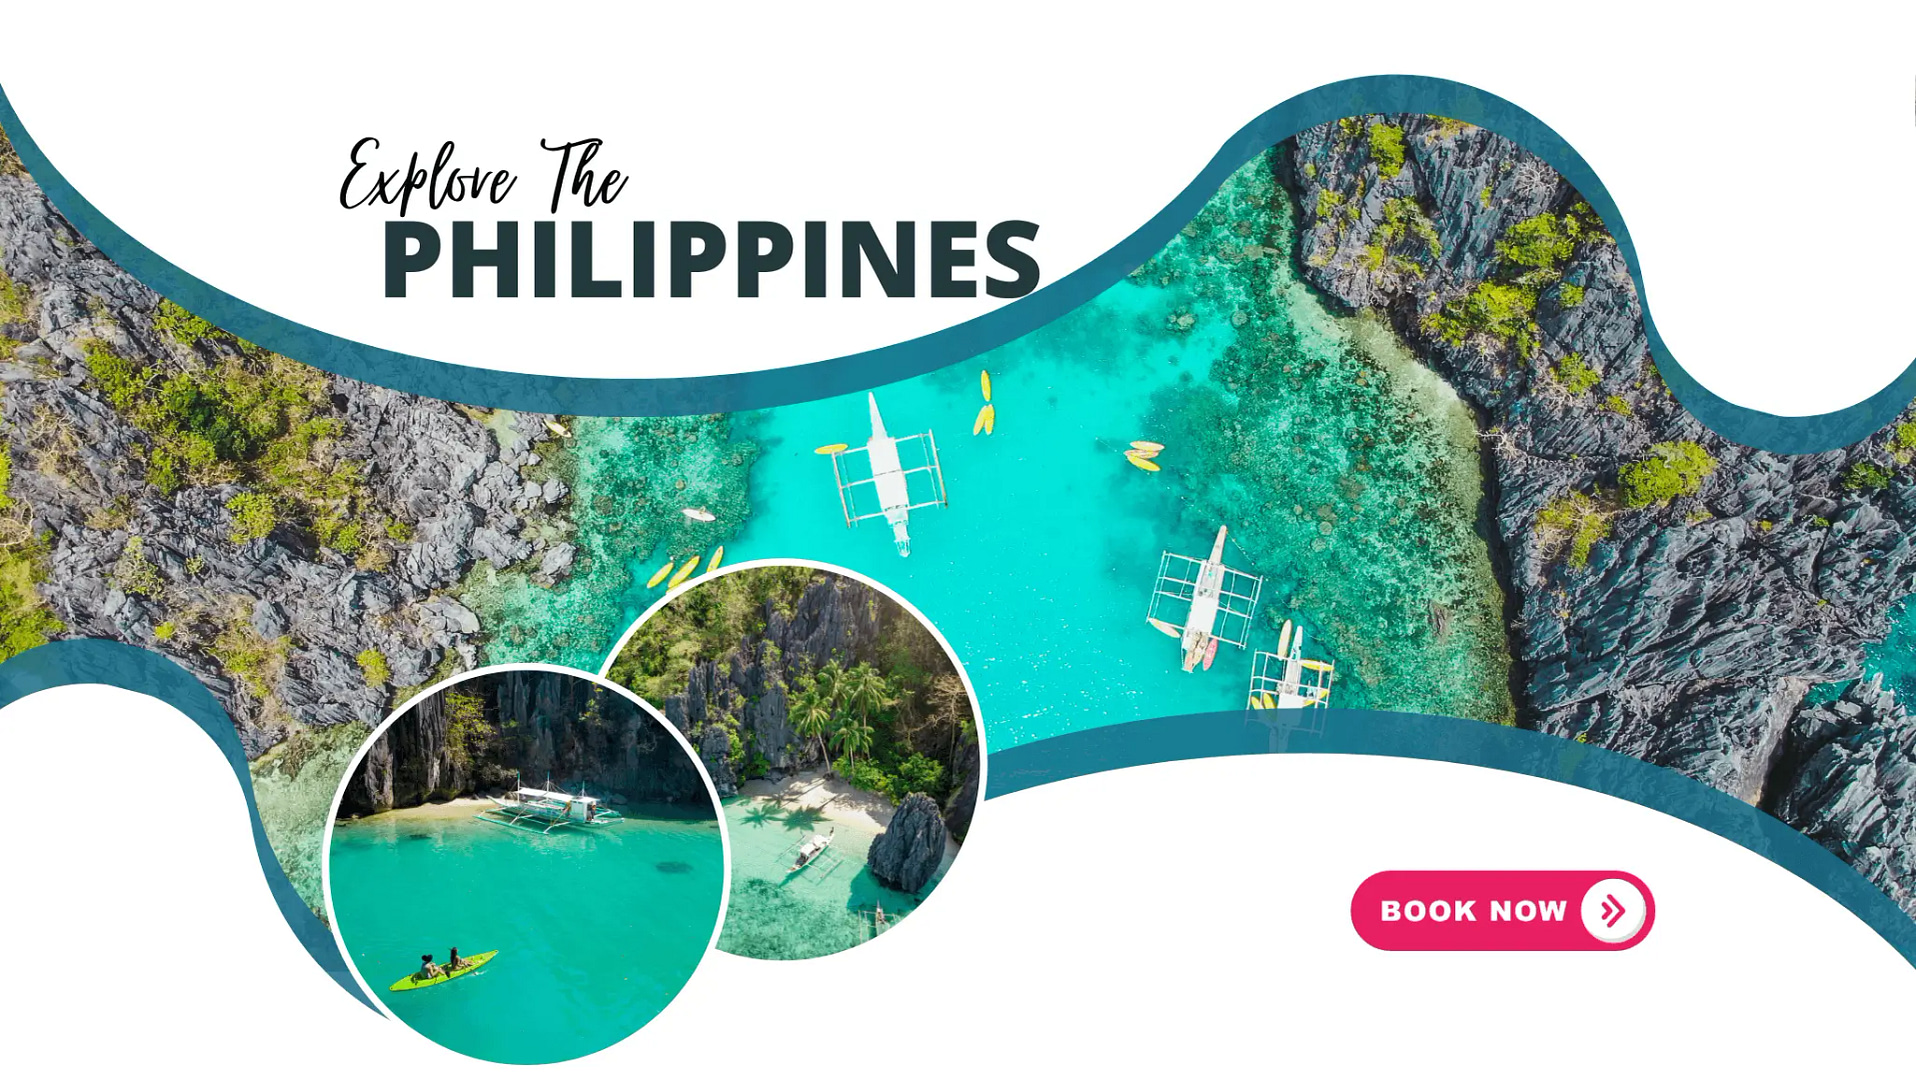 El Nido Travel Agency offering budget friendly tour package